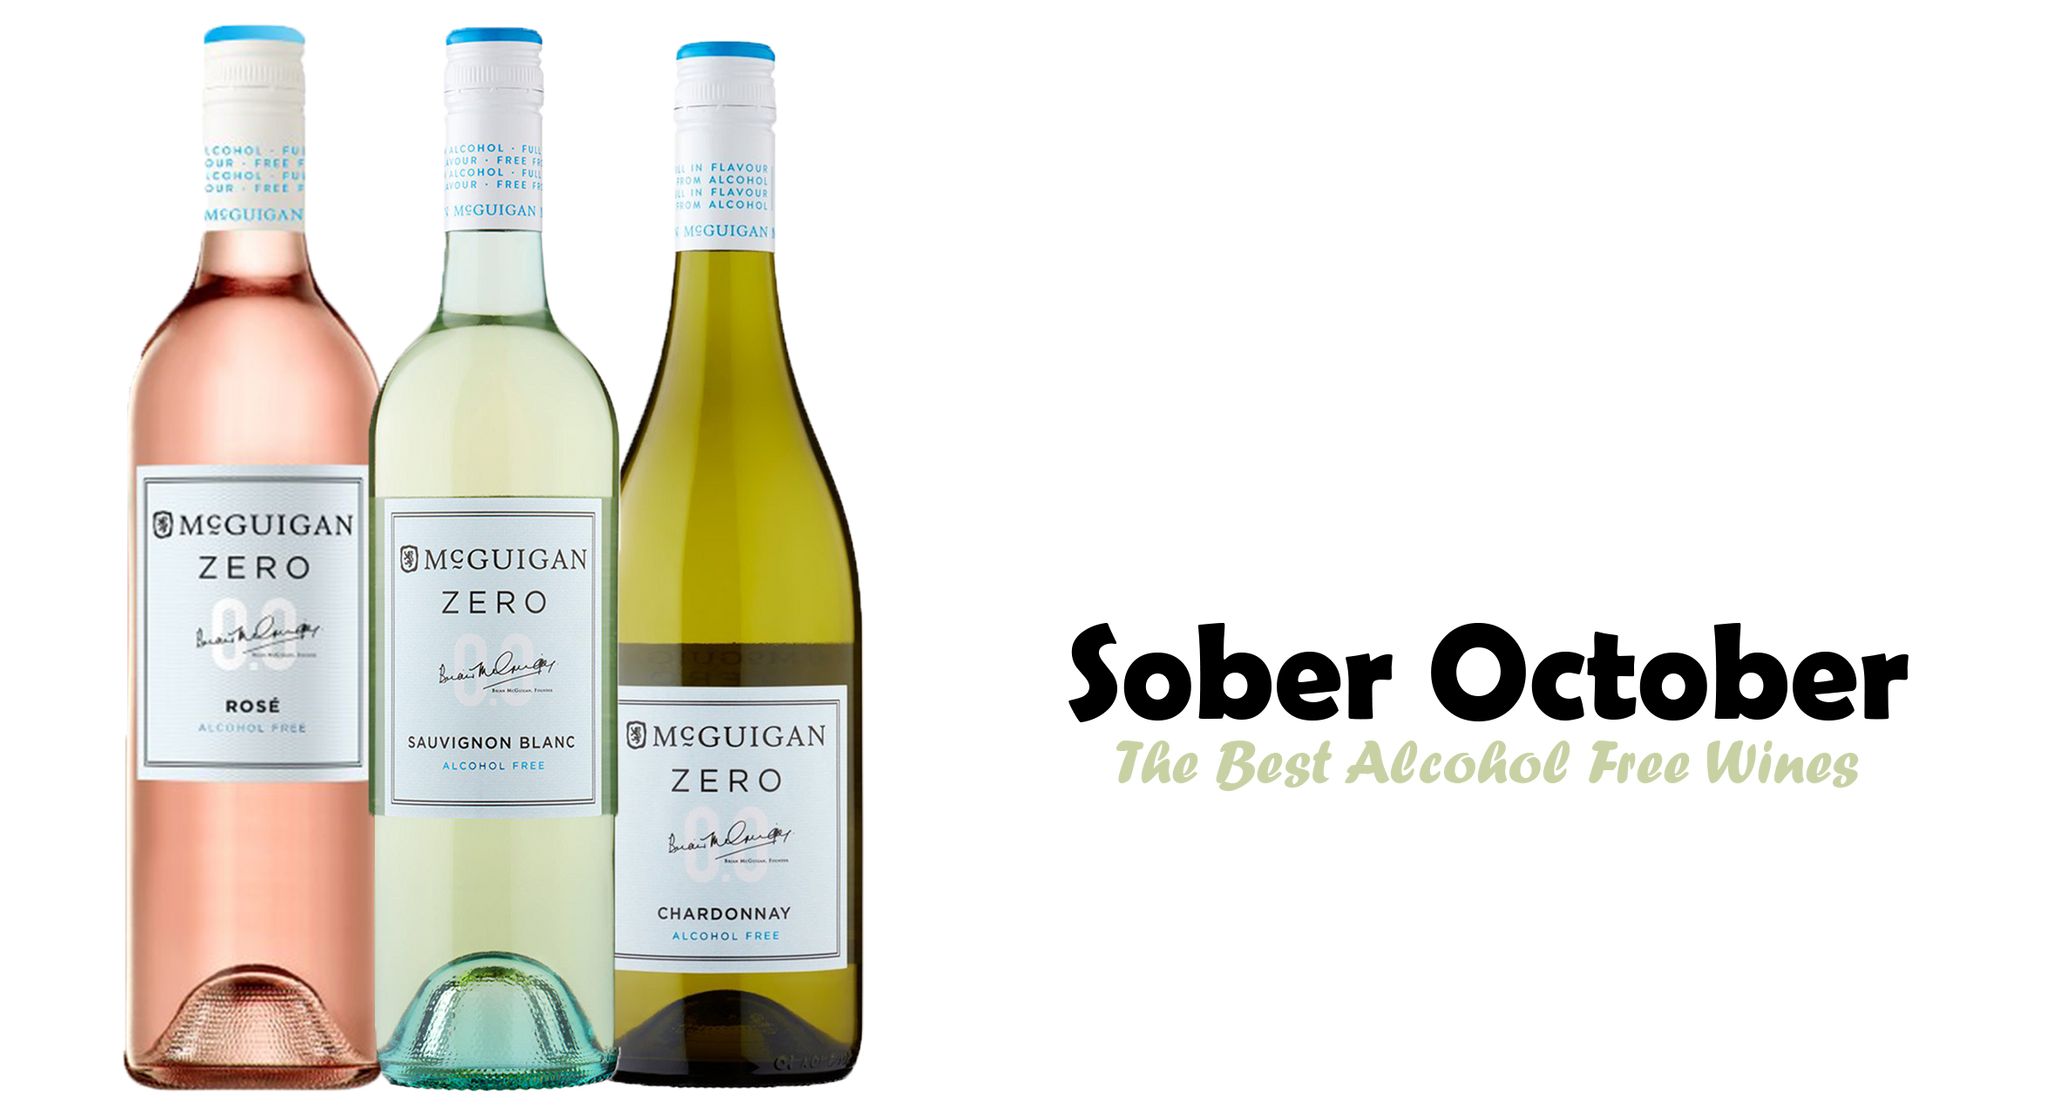 The best alcohol free wines for Sober October!